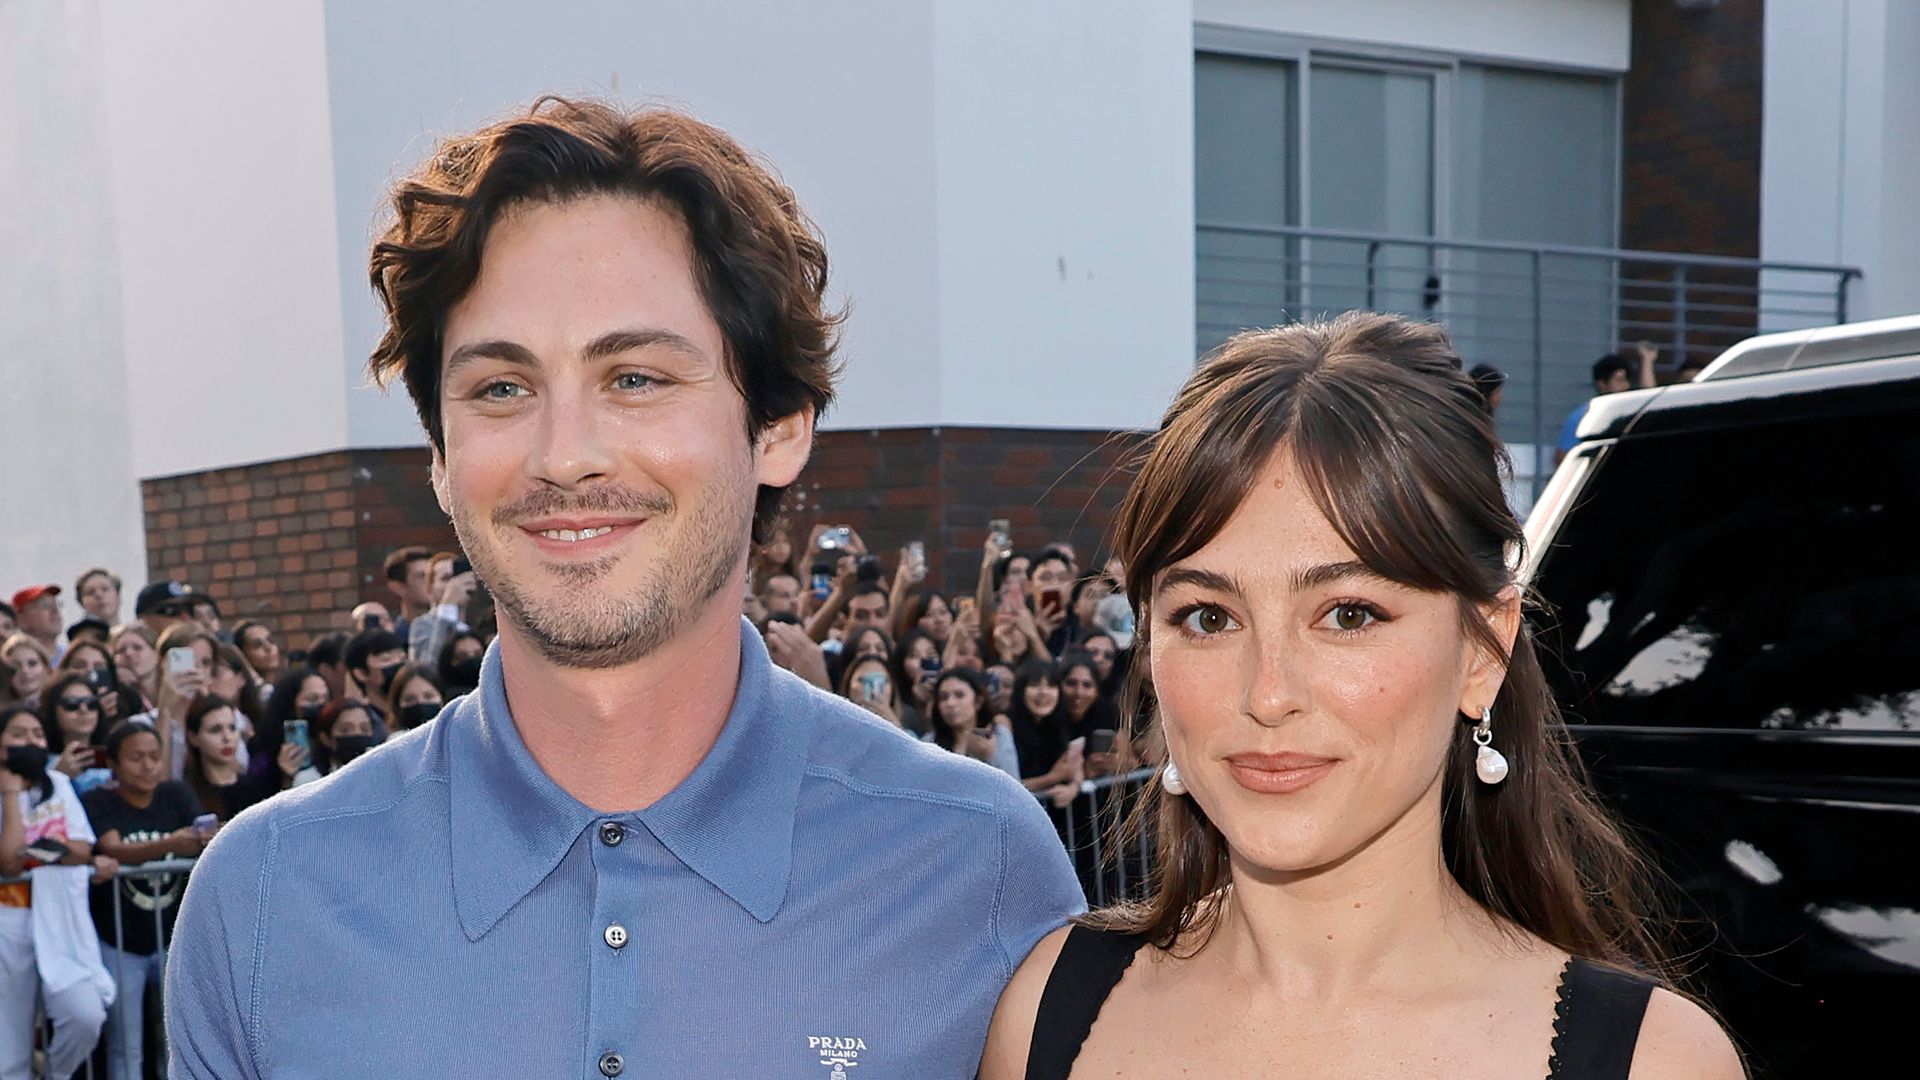 Logan Lerman and Analuisa Corrigan attend the Los Angeles Premiere of Columbia Pictures' "Bullet Train" at Regency Village Theatre on August 01, 2022 in Los Angeles, California